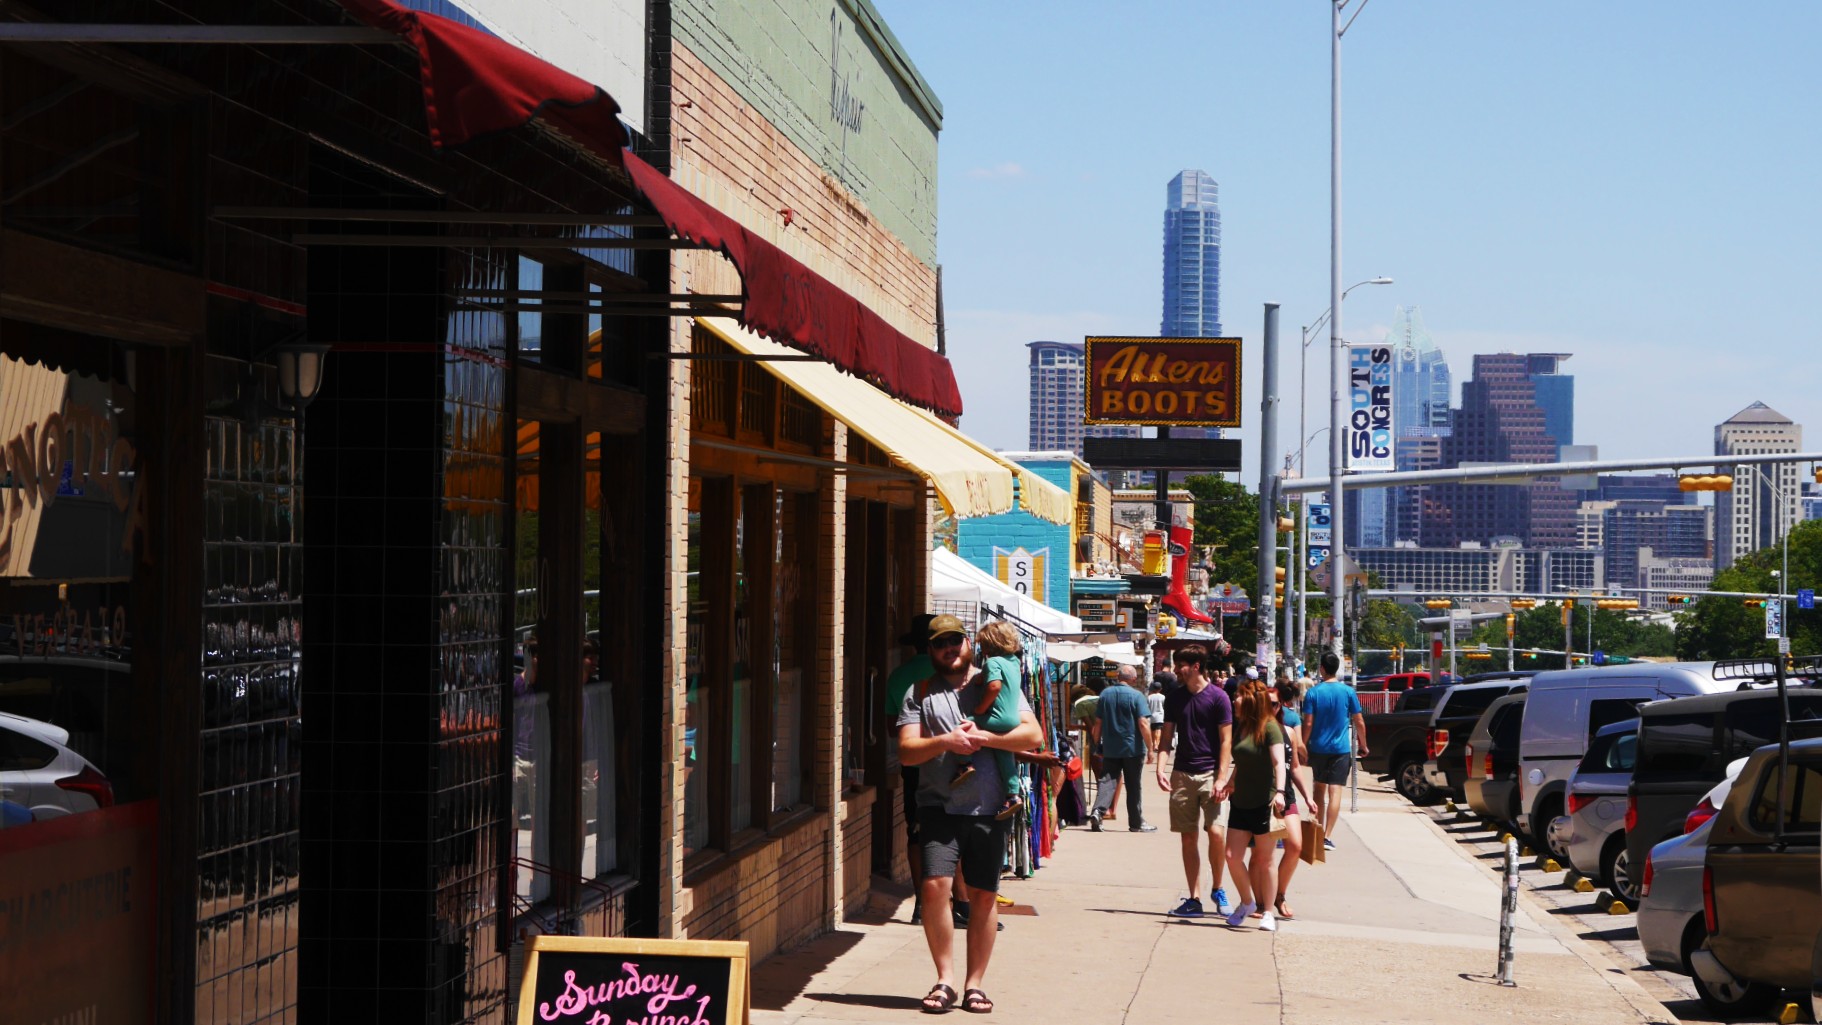 Austin's South Congress Shopping District has long being the place to go for vintage clothing. Today, SoCo is one of the city's most exciting commercial areas.